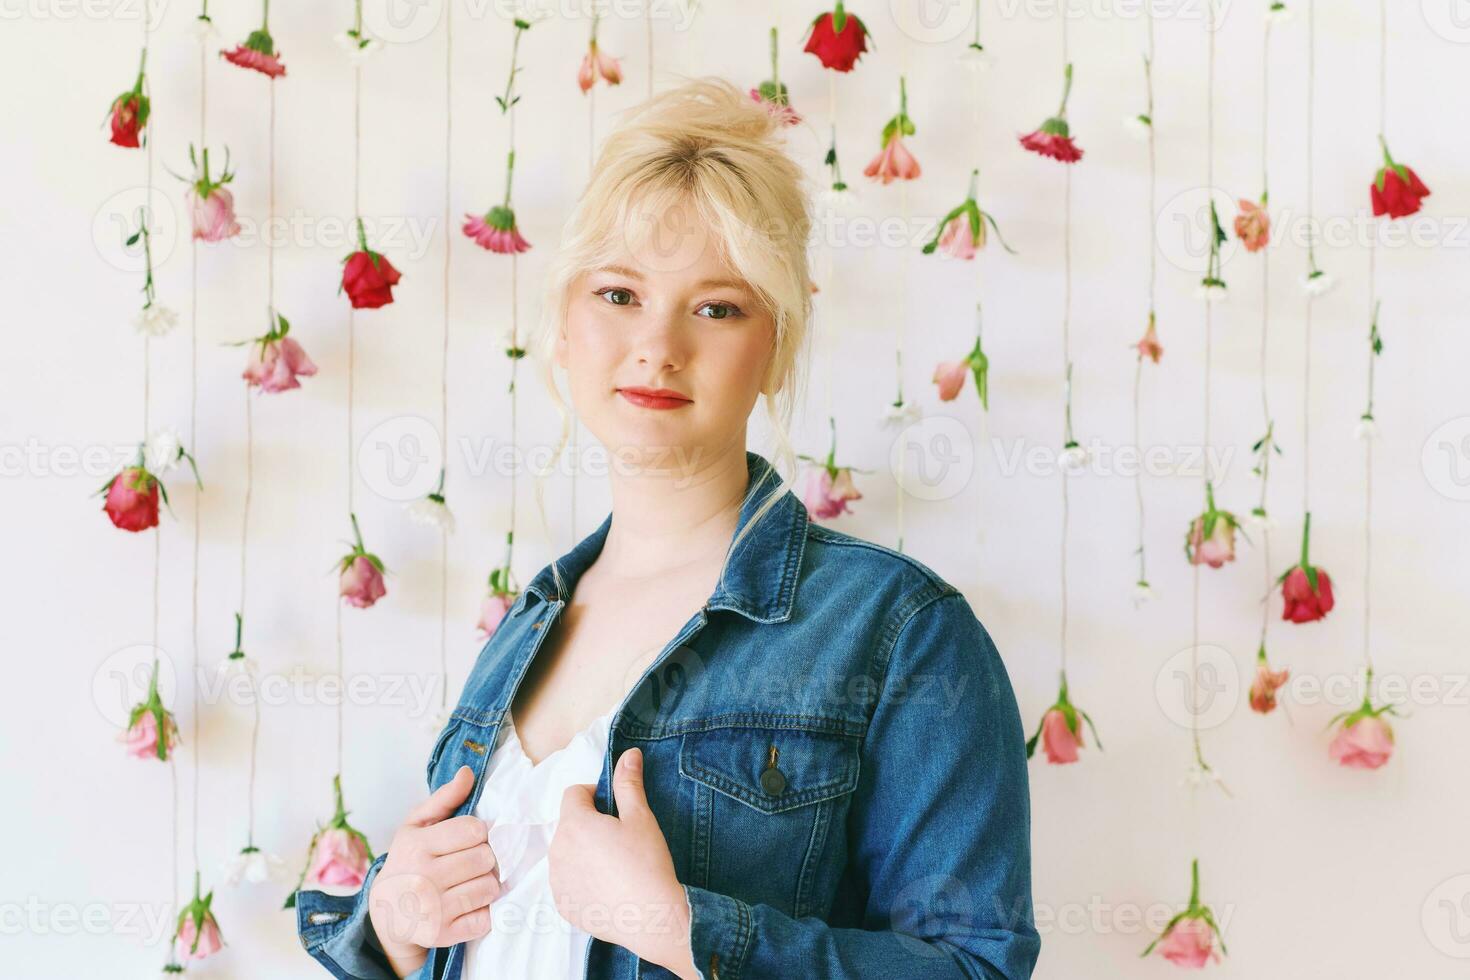 Studio portrait of pretty young teenage 15 - 16 year old girl wearing denim jacket, posing on white background with hanging flowers, beauty and fashion concept photo